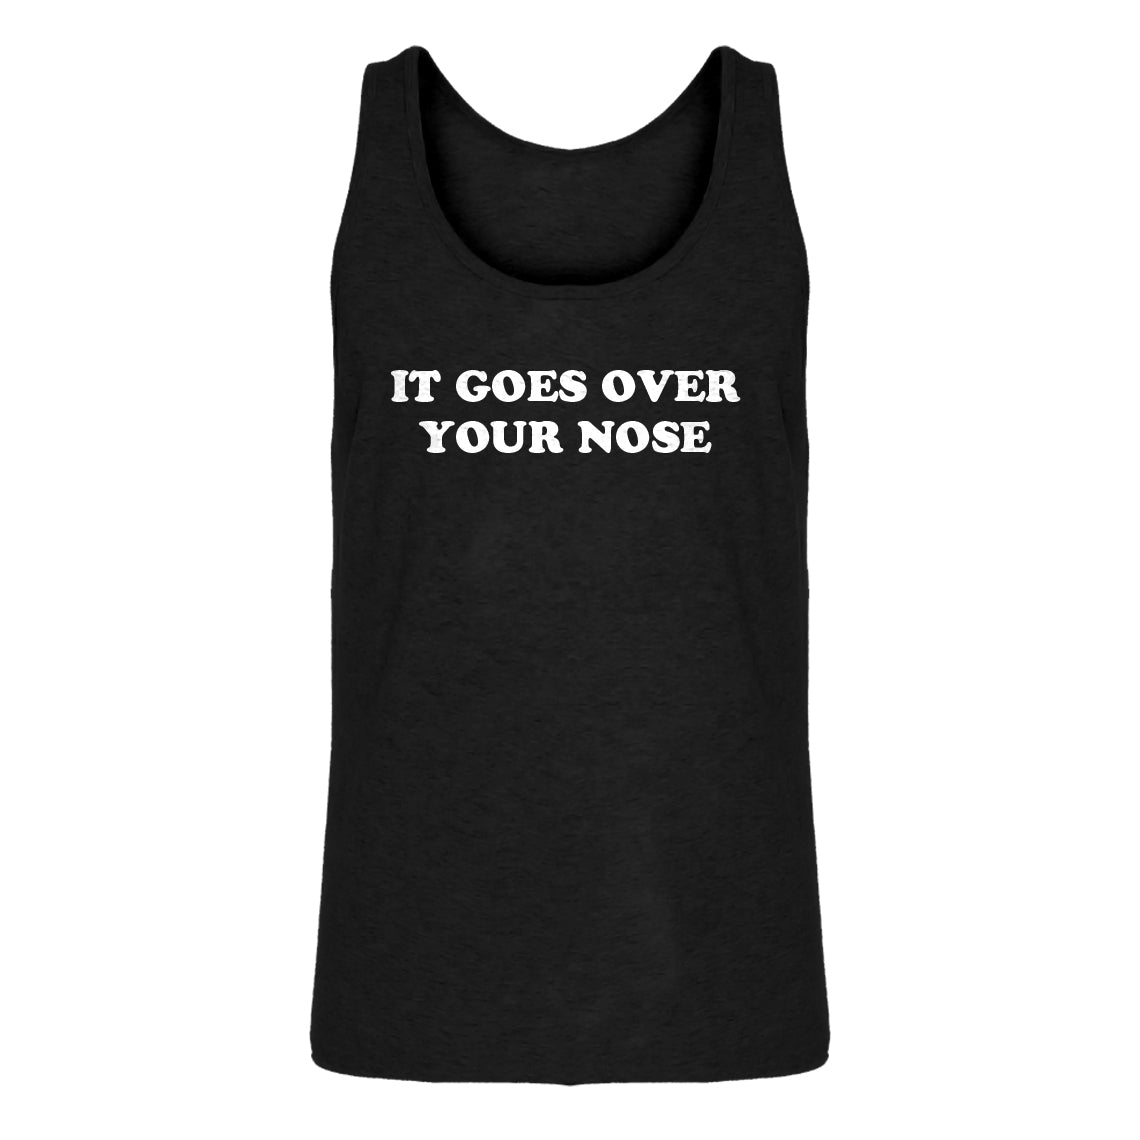 Mens It Goes Over Your Nose Jersey Tank Top